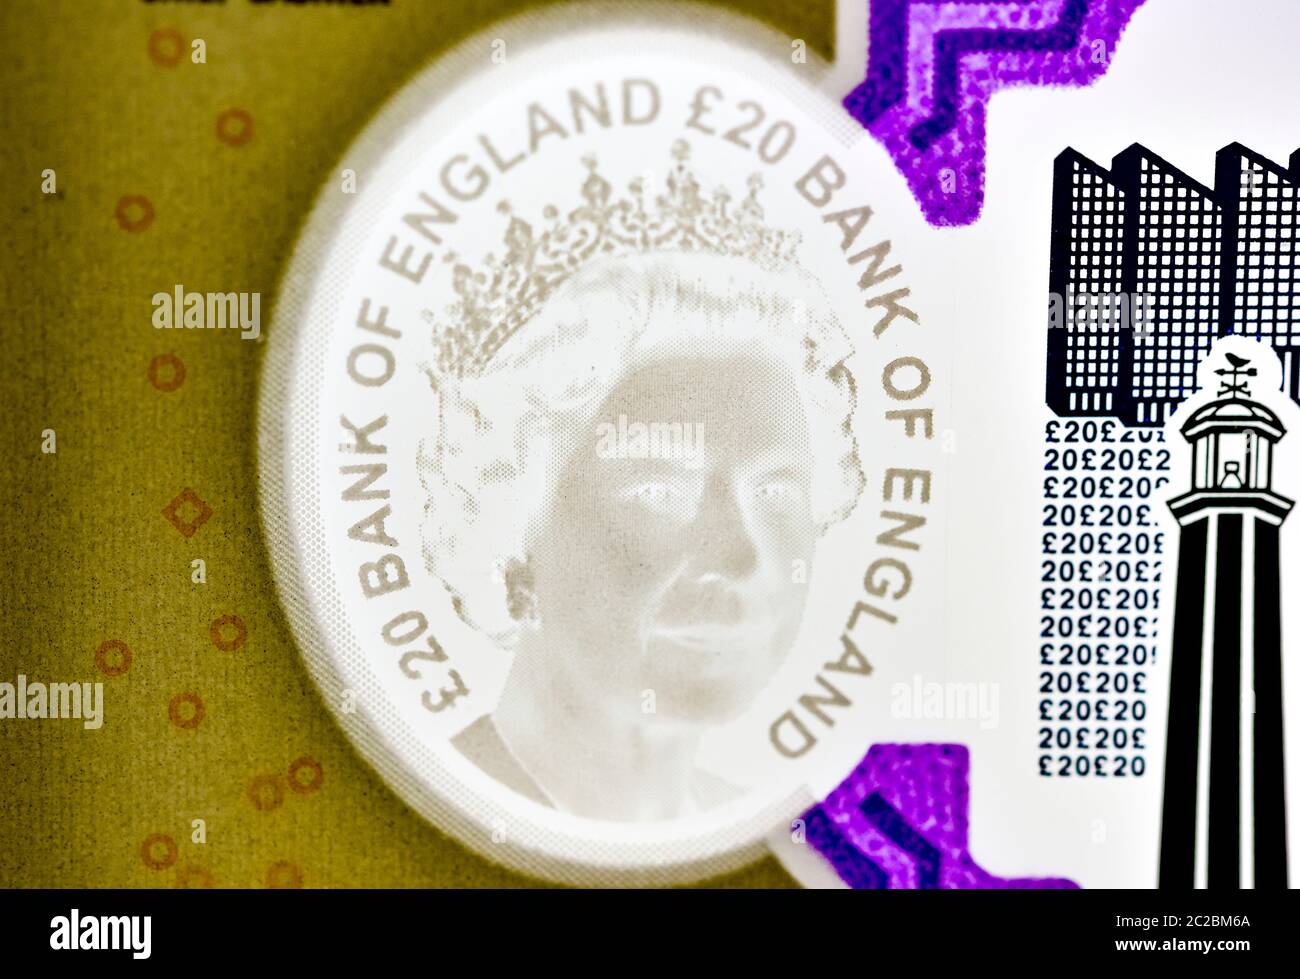 Polymer Uk £20 Note Close Up Of A Hologram Showing The Queens Head